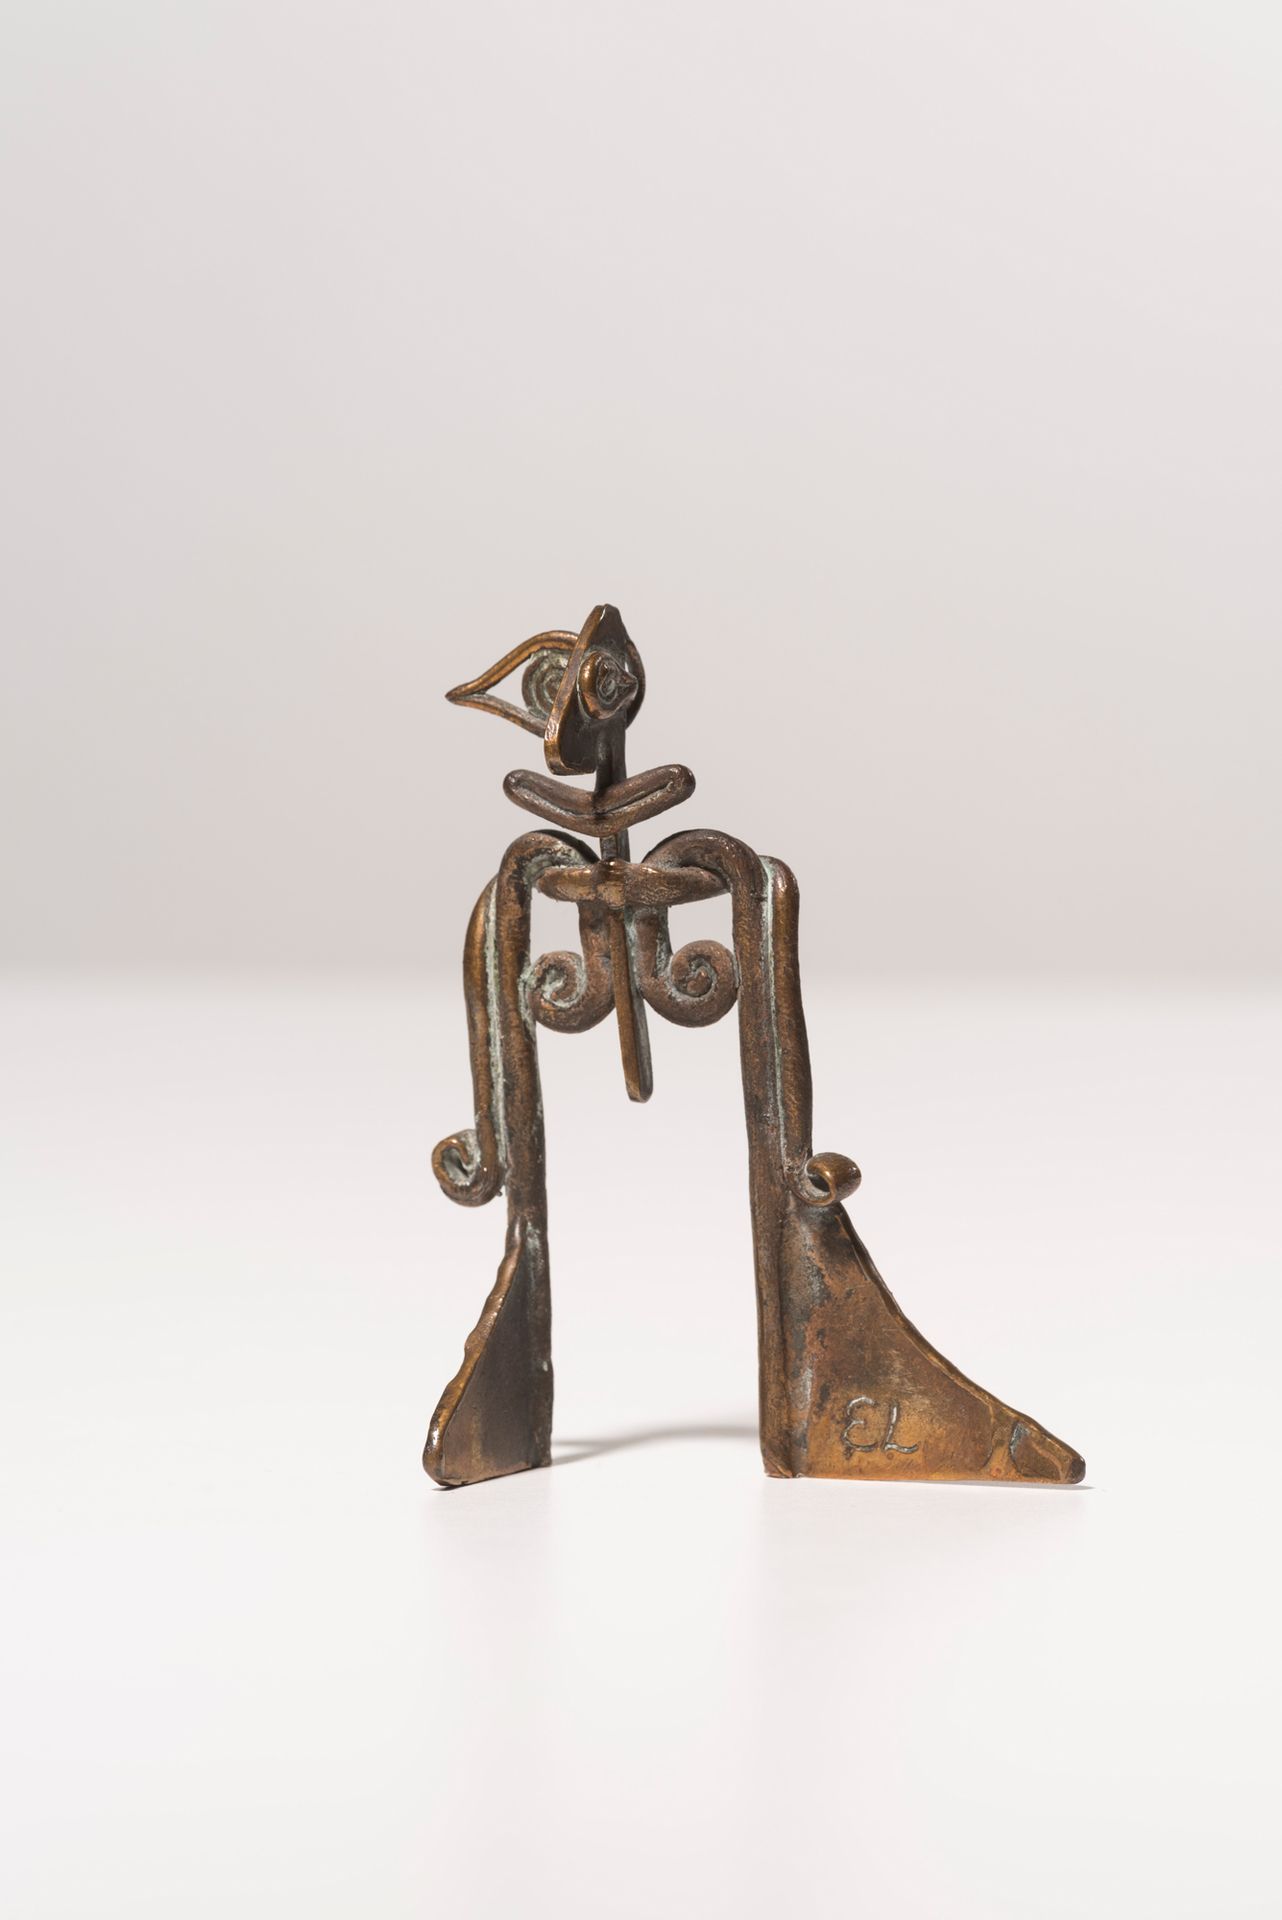 OLIVIER LELOUP (1951-2000) Homenaje a Picasso.
Bronce. Con monograma. 
Brons. Un&hellip;